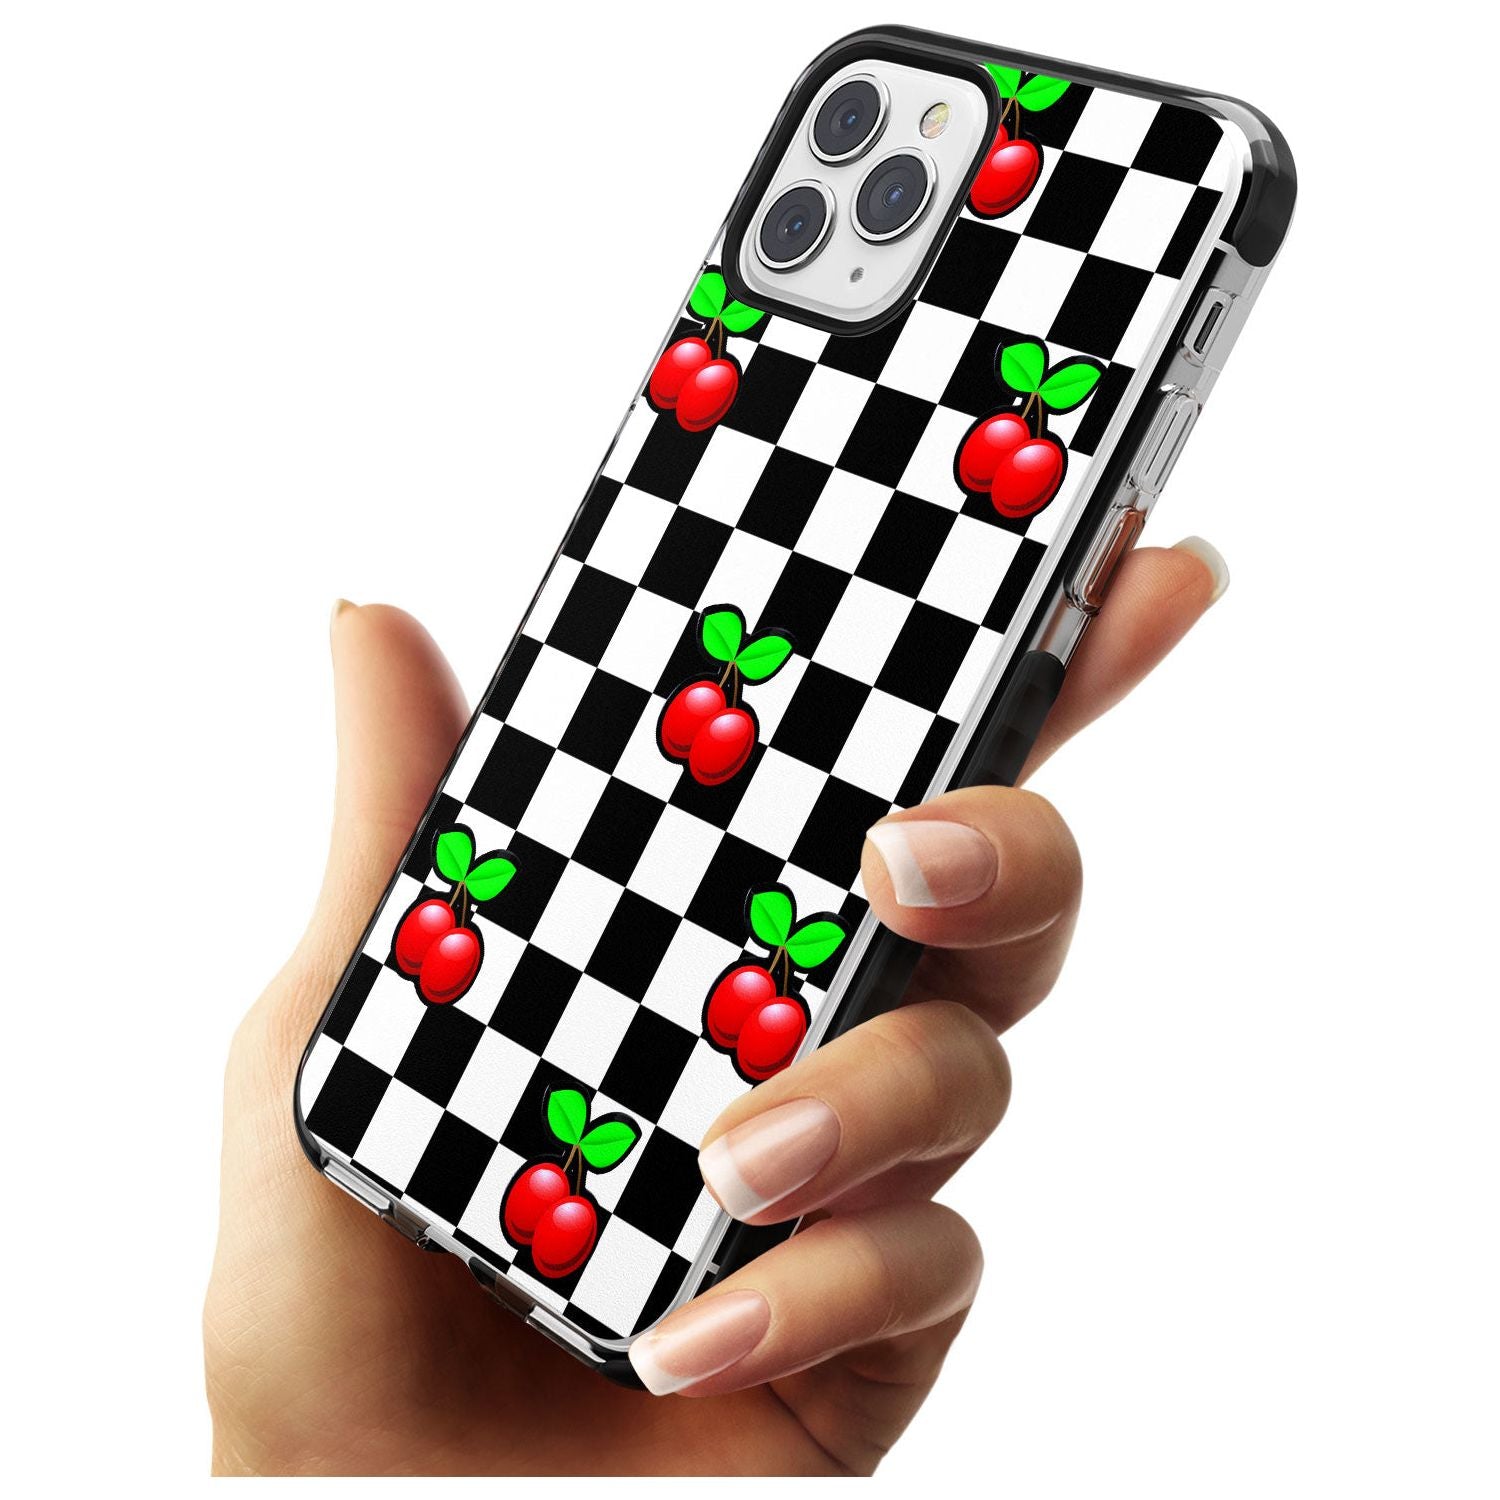 Checkered Cherry Black Impact Phone Case for iPhone 11